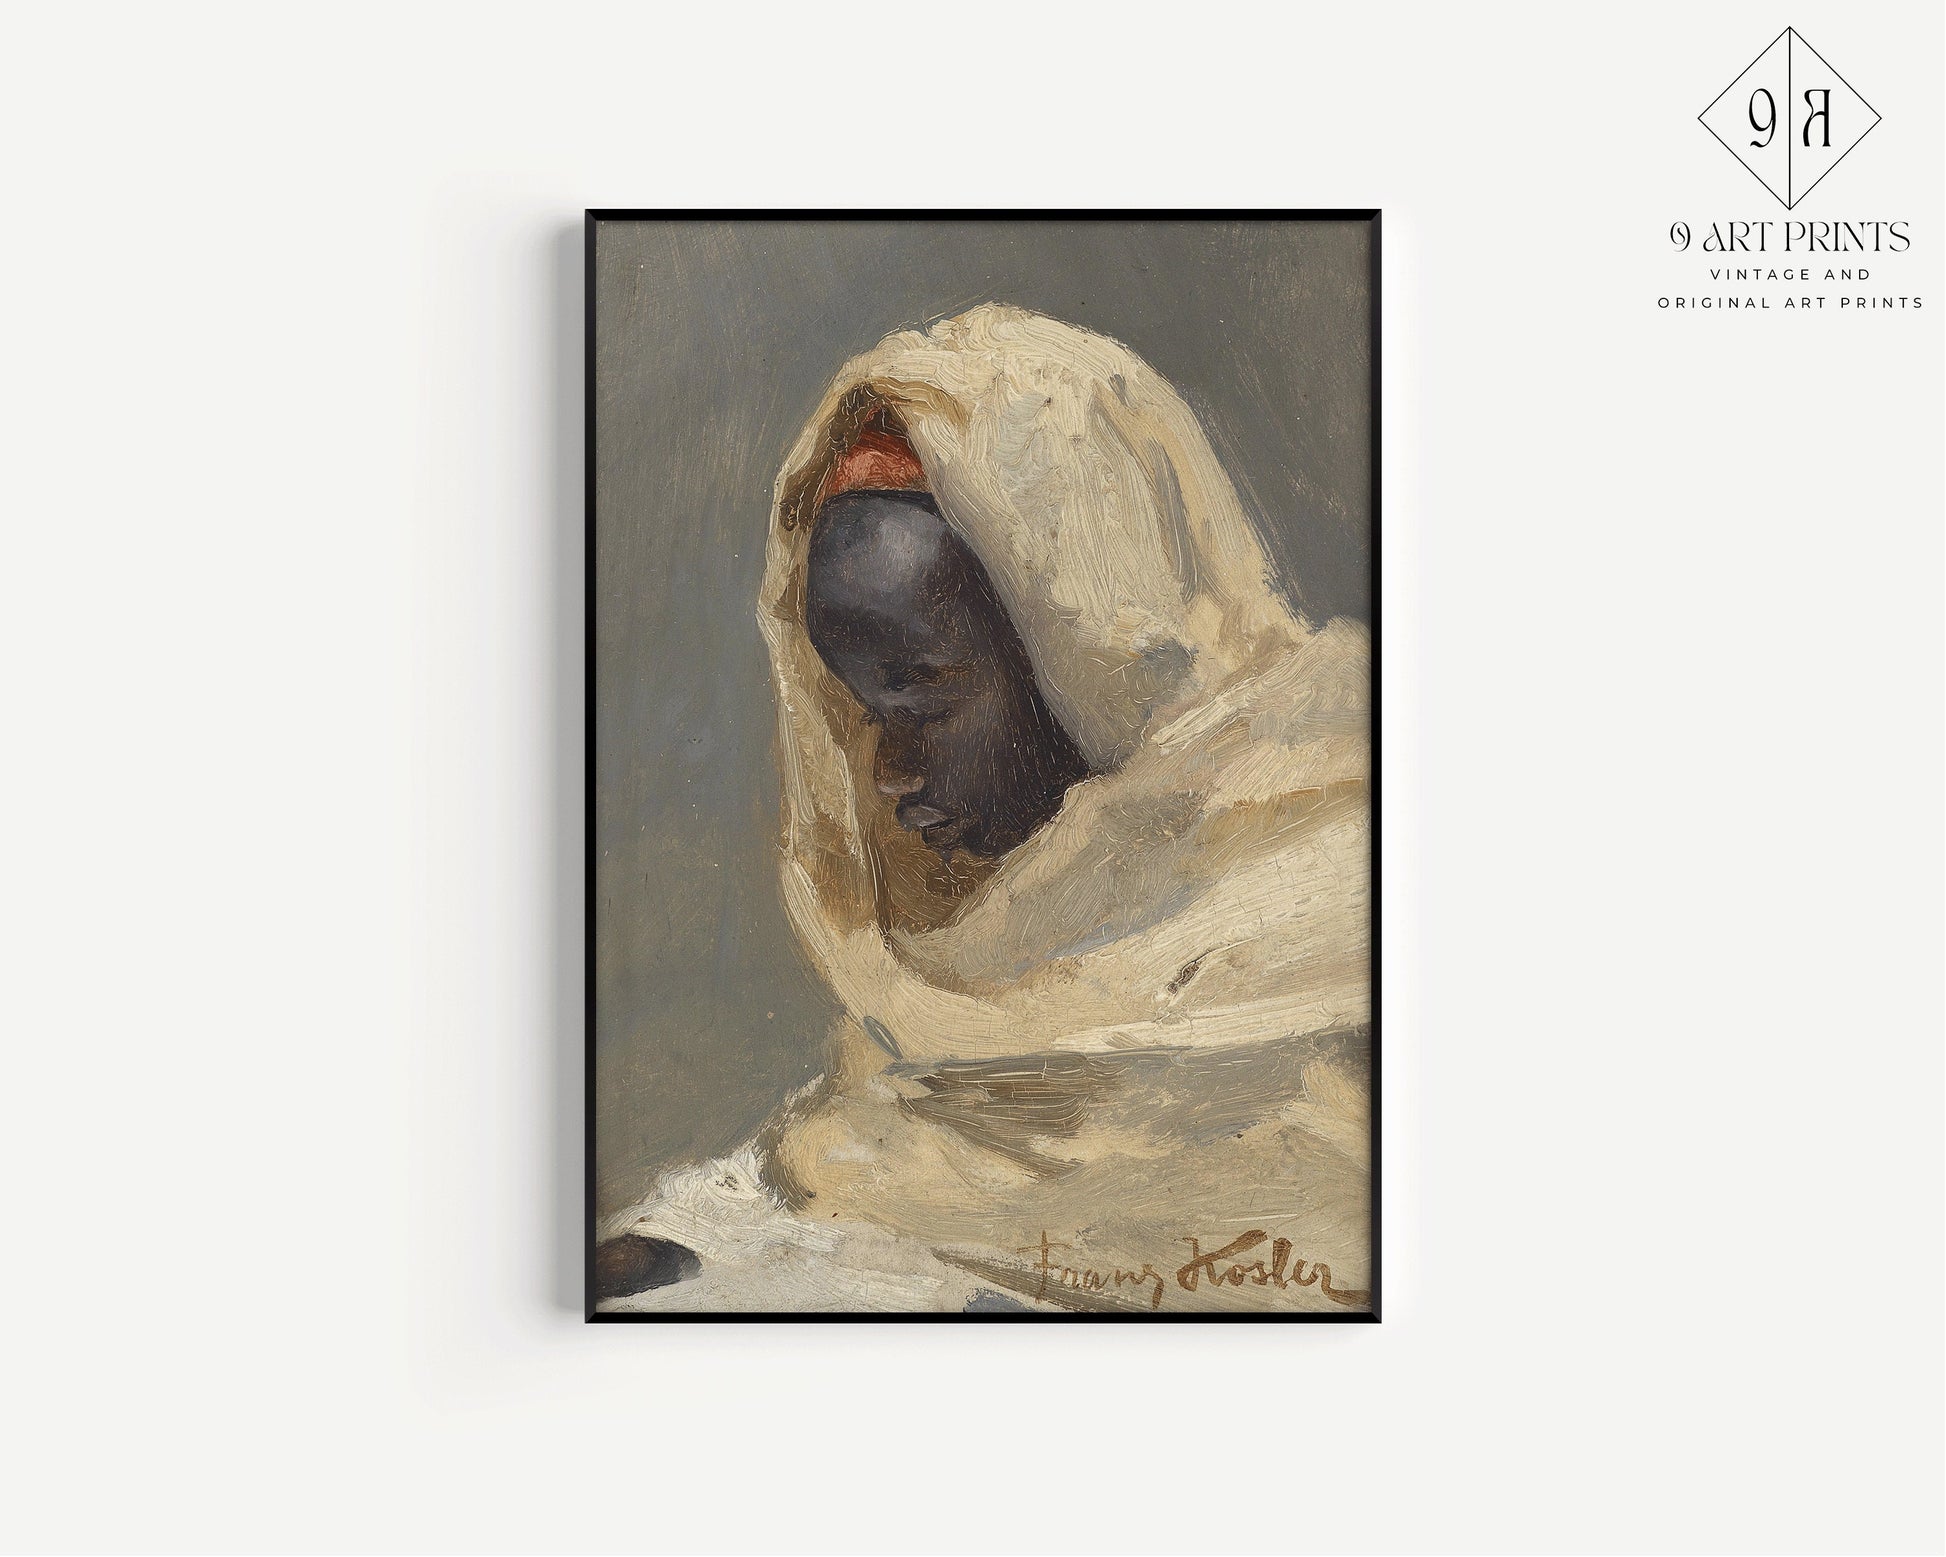 Franz Xaver Kosler A Bedouin Man Orientalist Fine Art Famous Iconic Painting Vintage Ready to hang Framed Home Office Decor Print Gift Idea